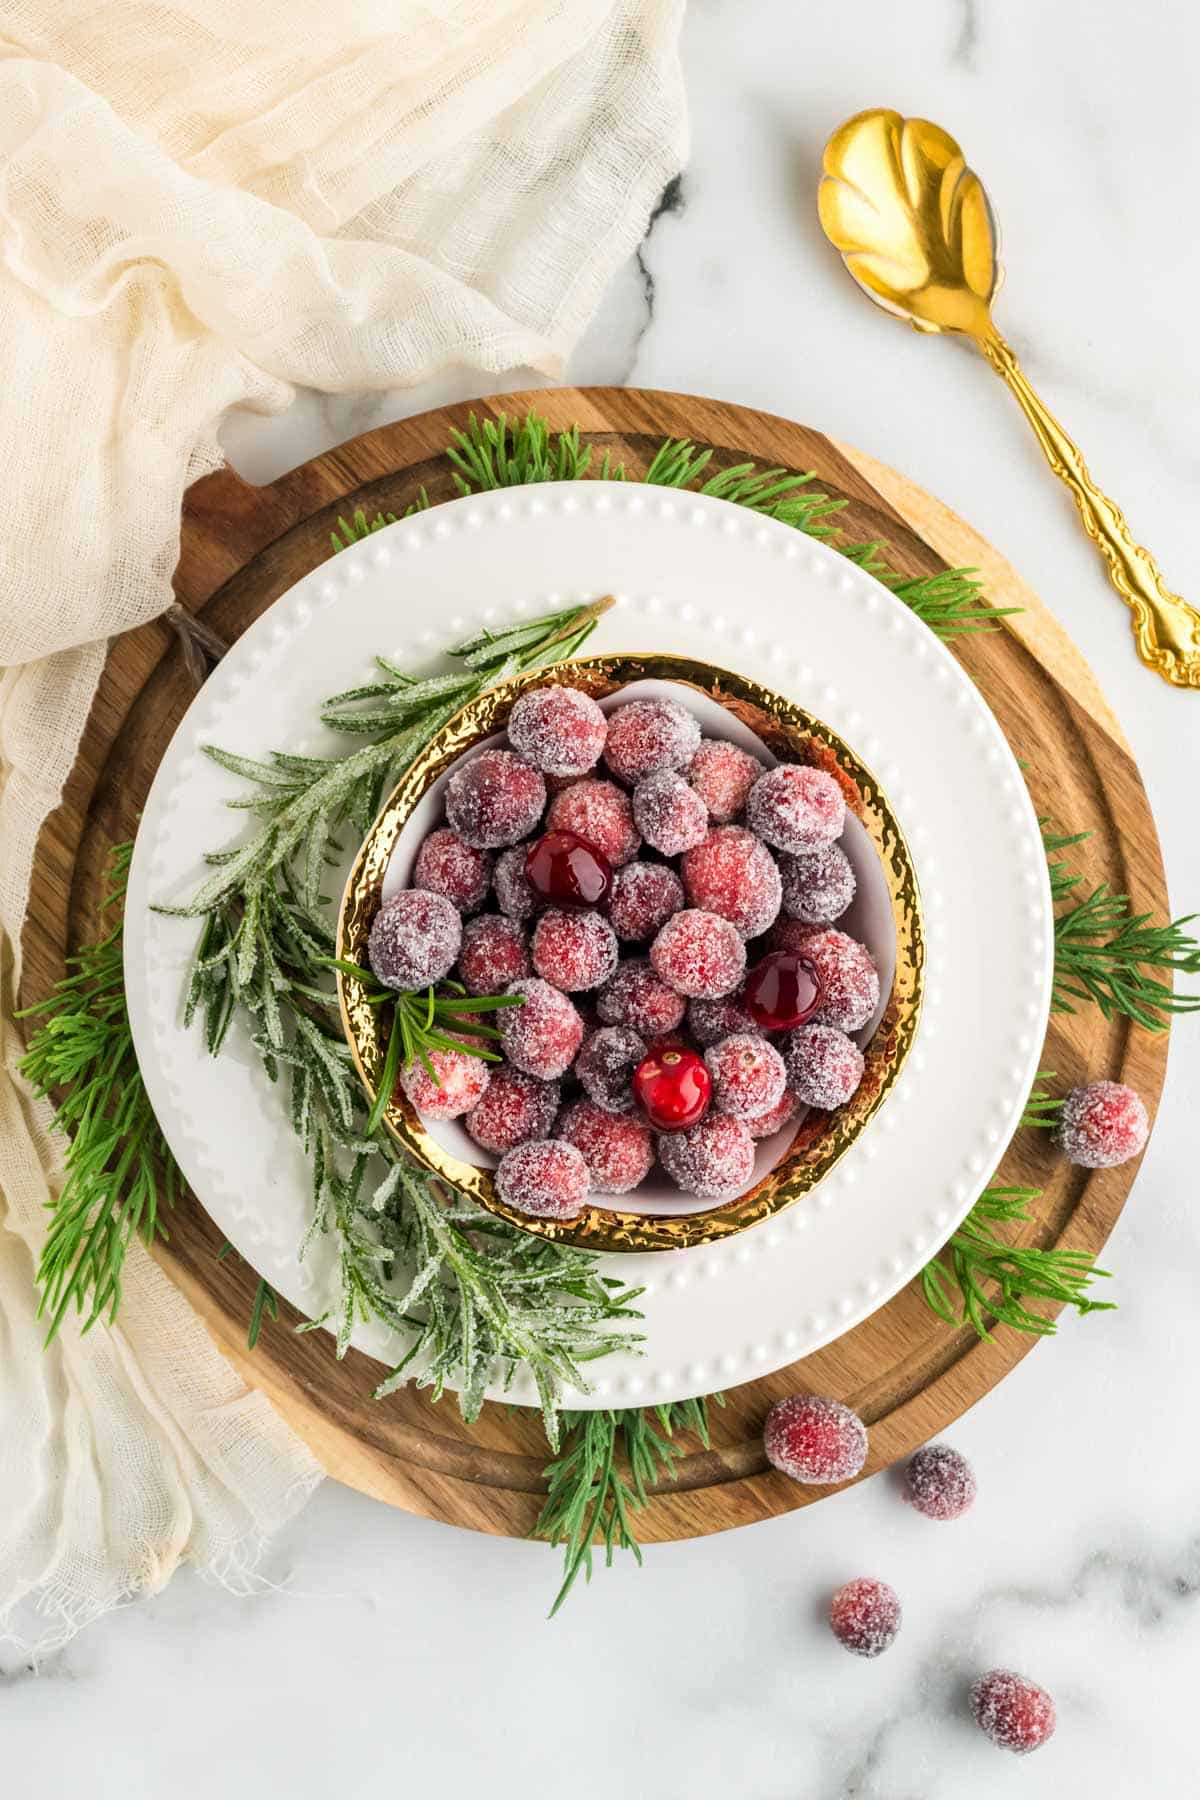 Sugared cranberries in a gold rimmed bowl set on a white charger and wooden board garnished with sugared rosemary.